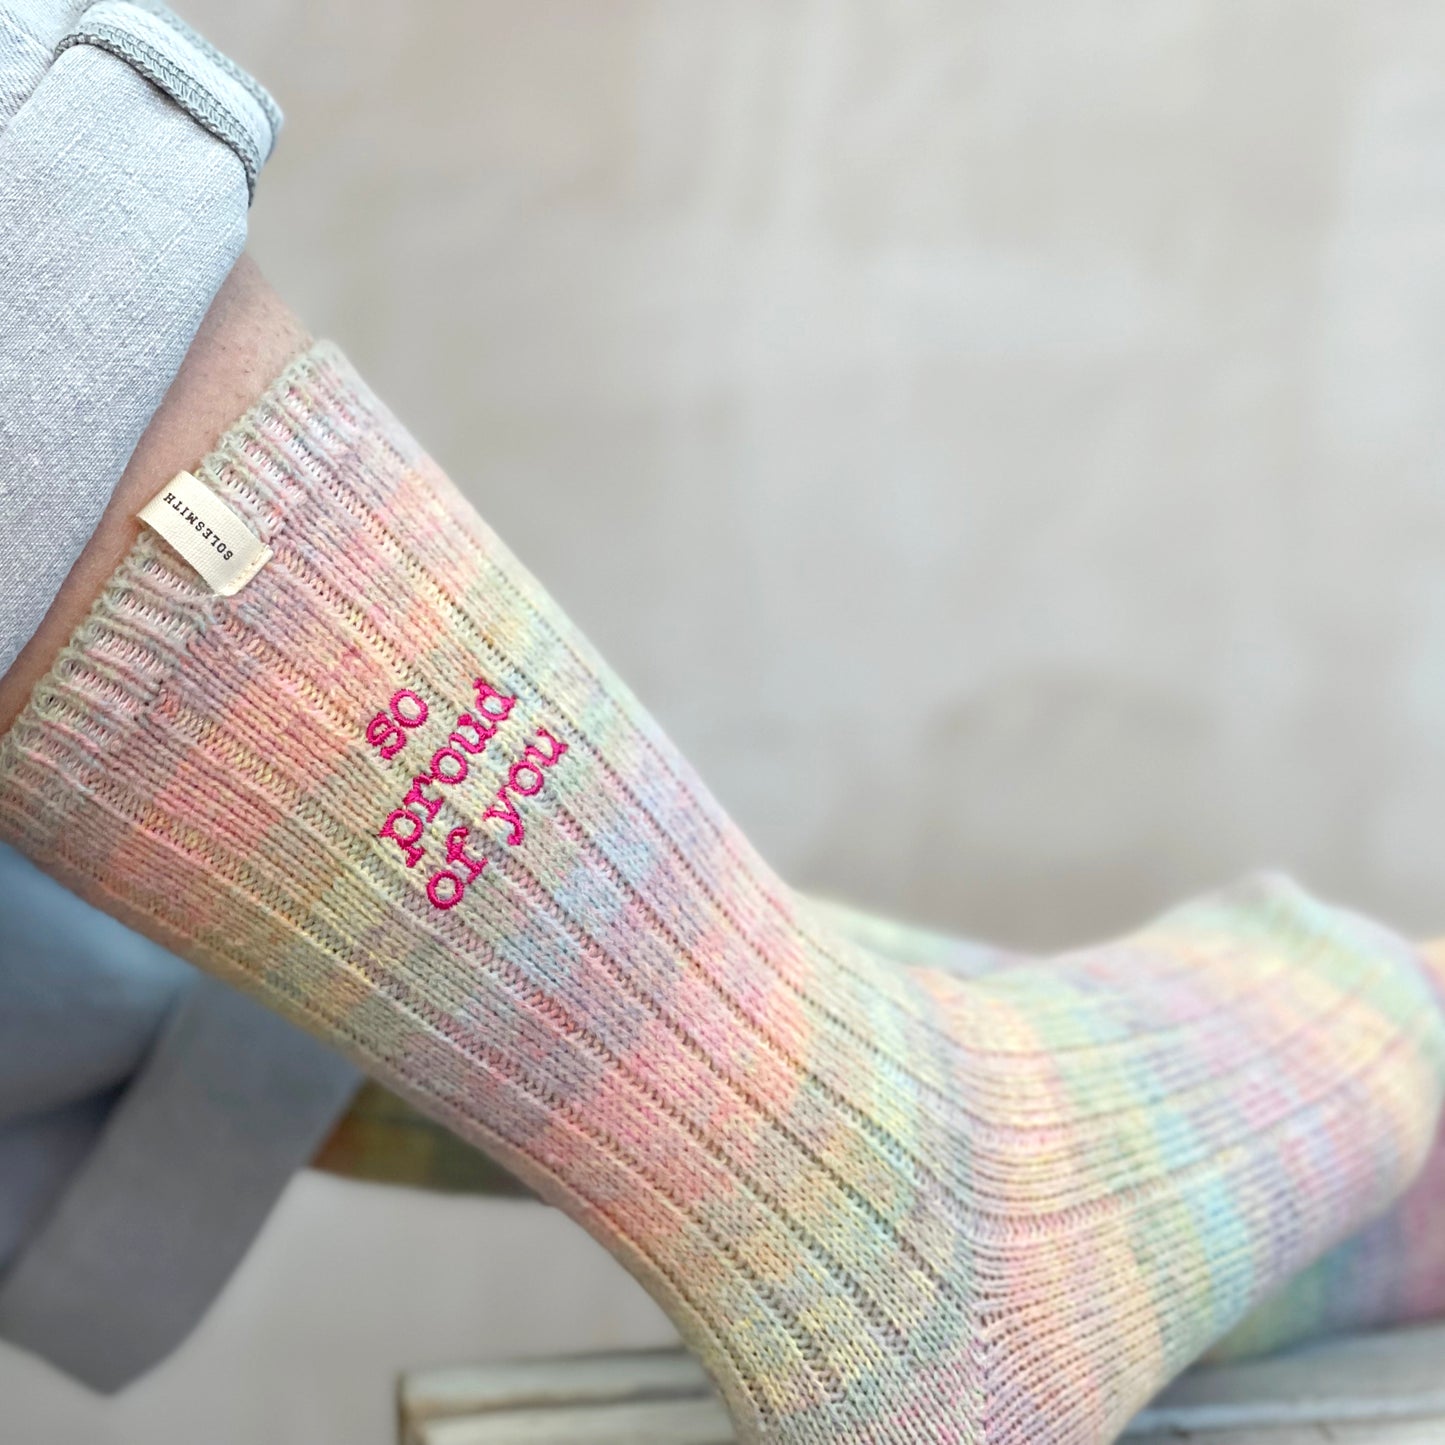 Cancer Care Slogan Socks, gift for friend with cancer, chemo socks